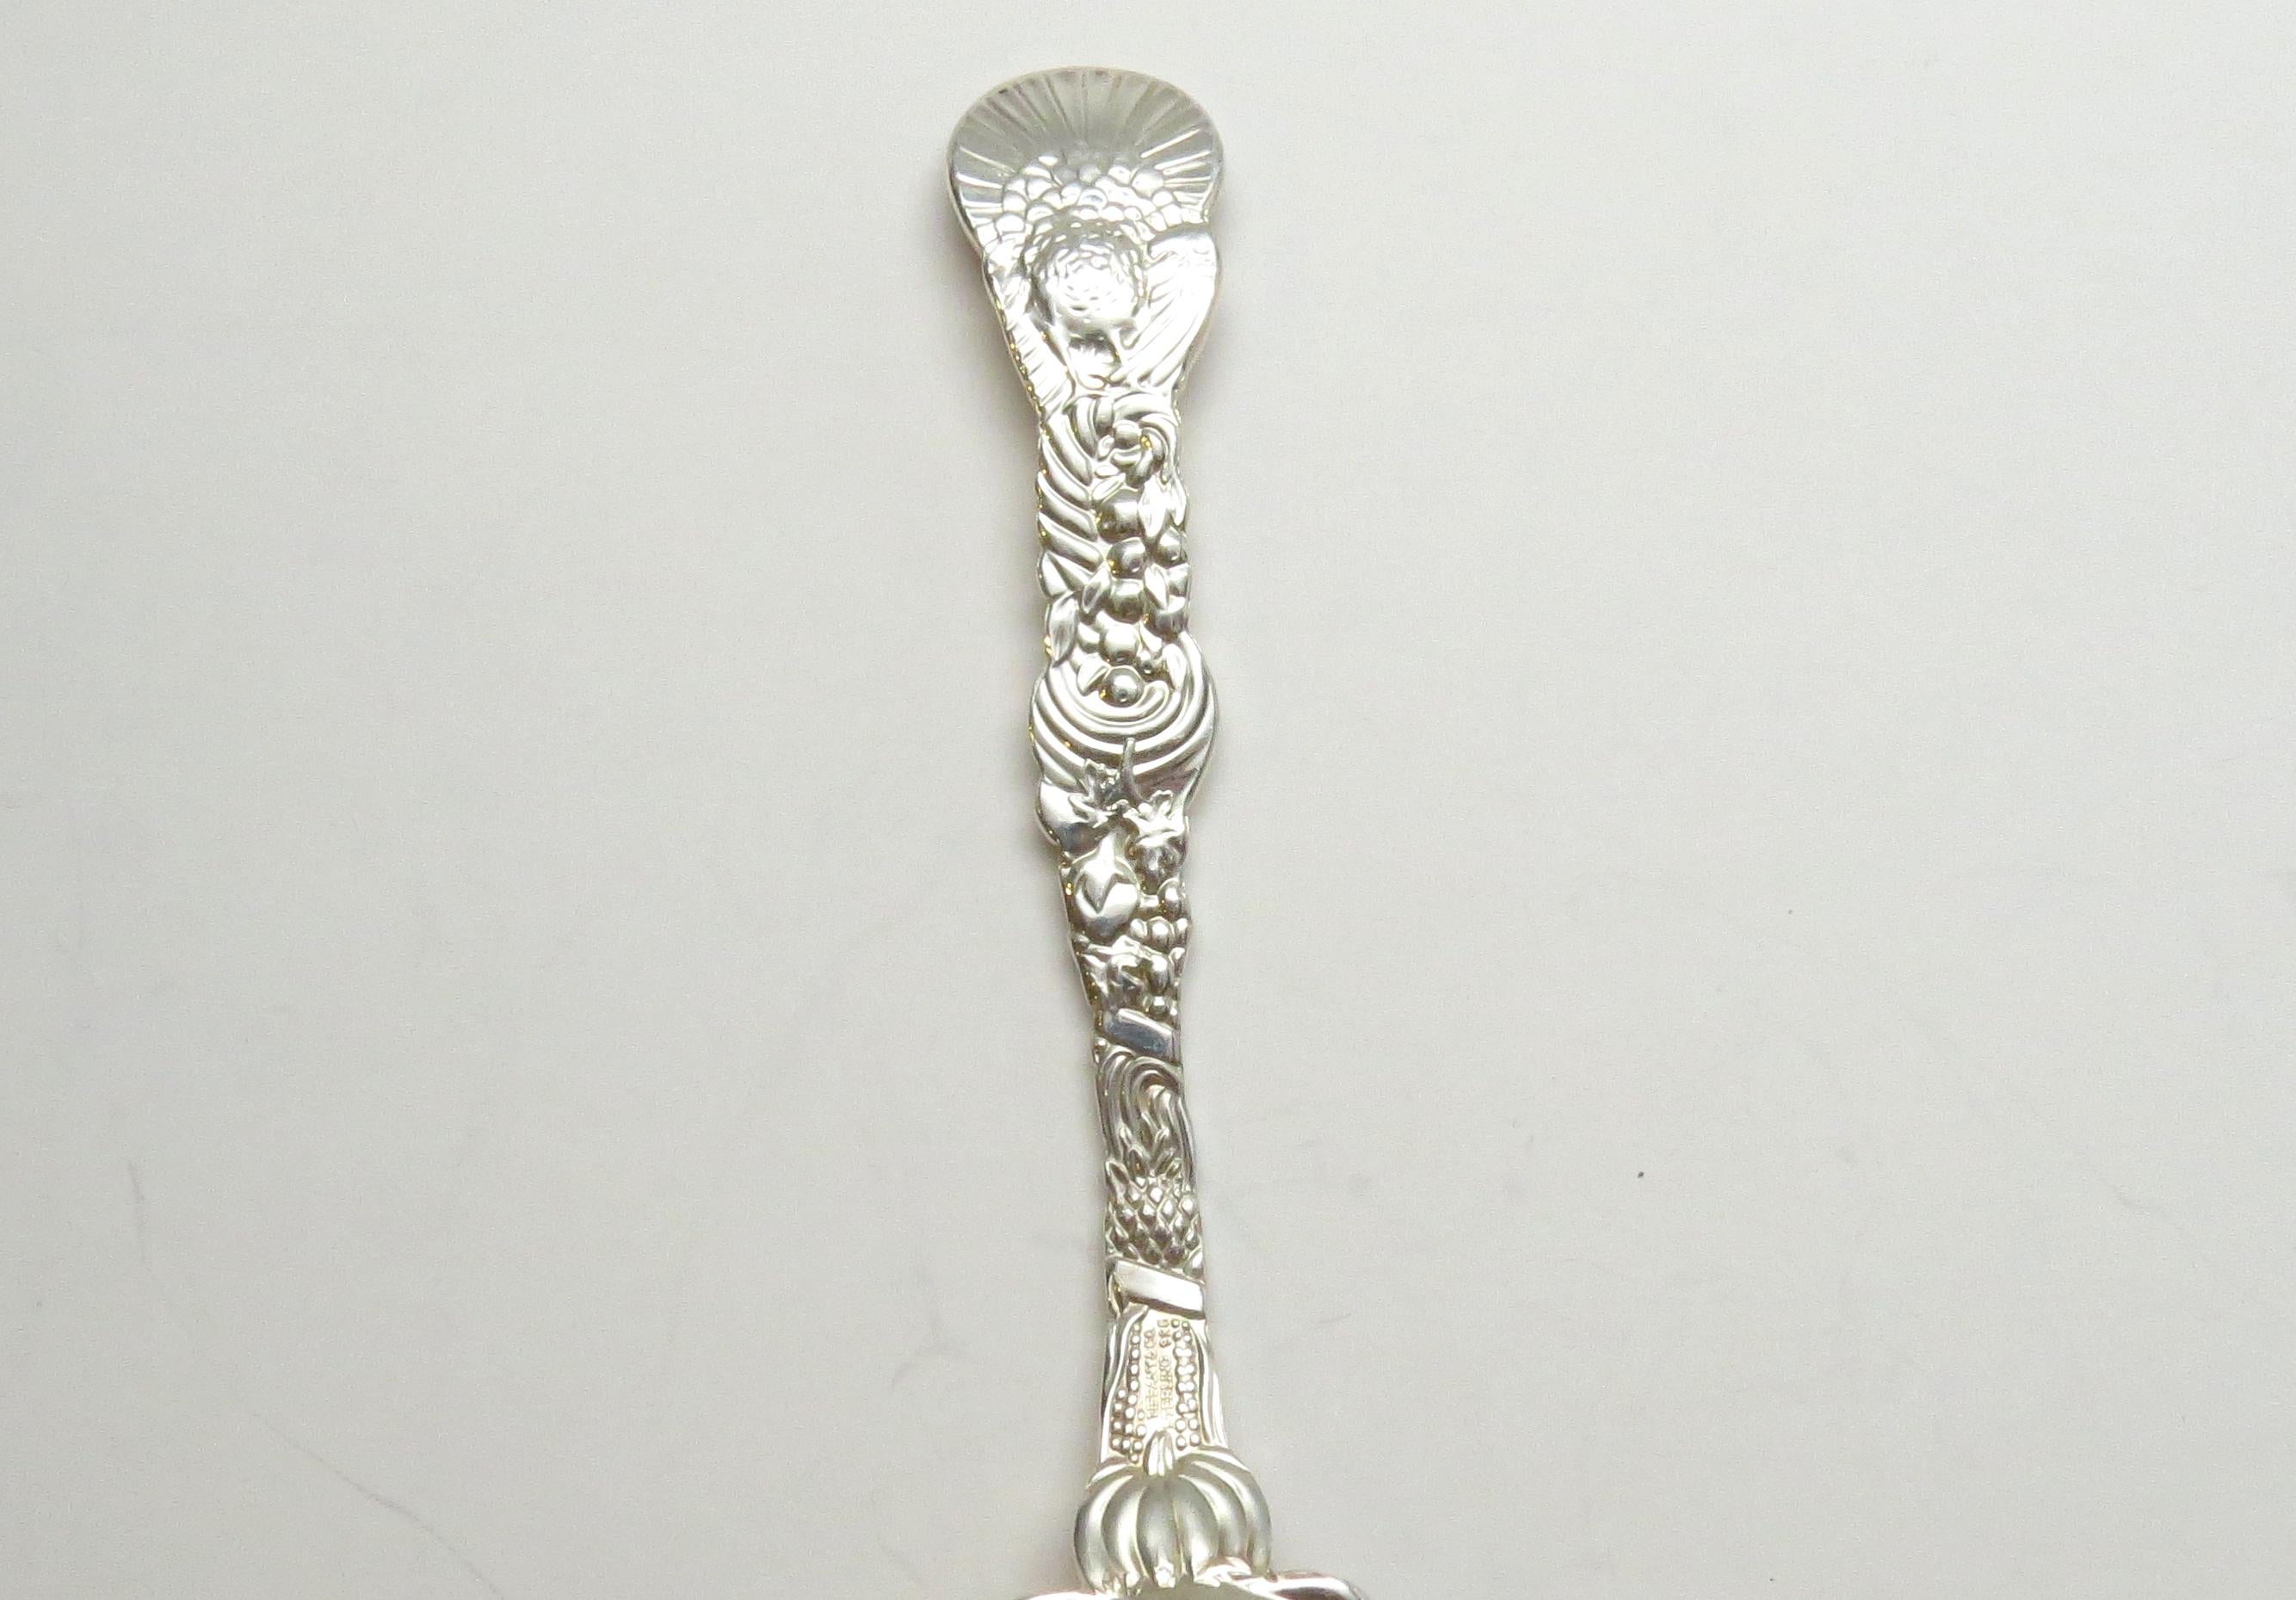 20th Century Tiffany & Co. Sterling Silver Thanksgiving Cranberry Serving Spoon